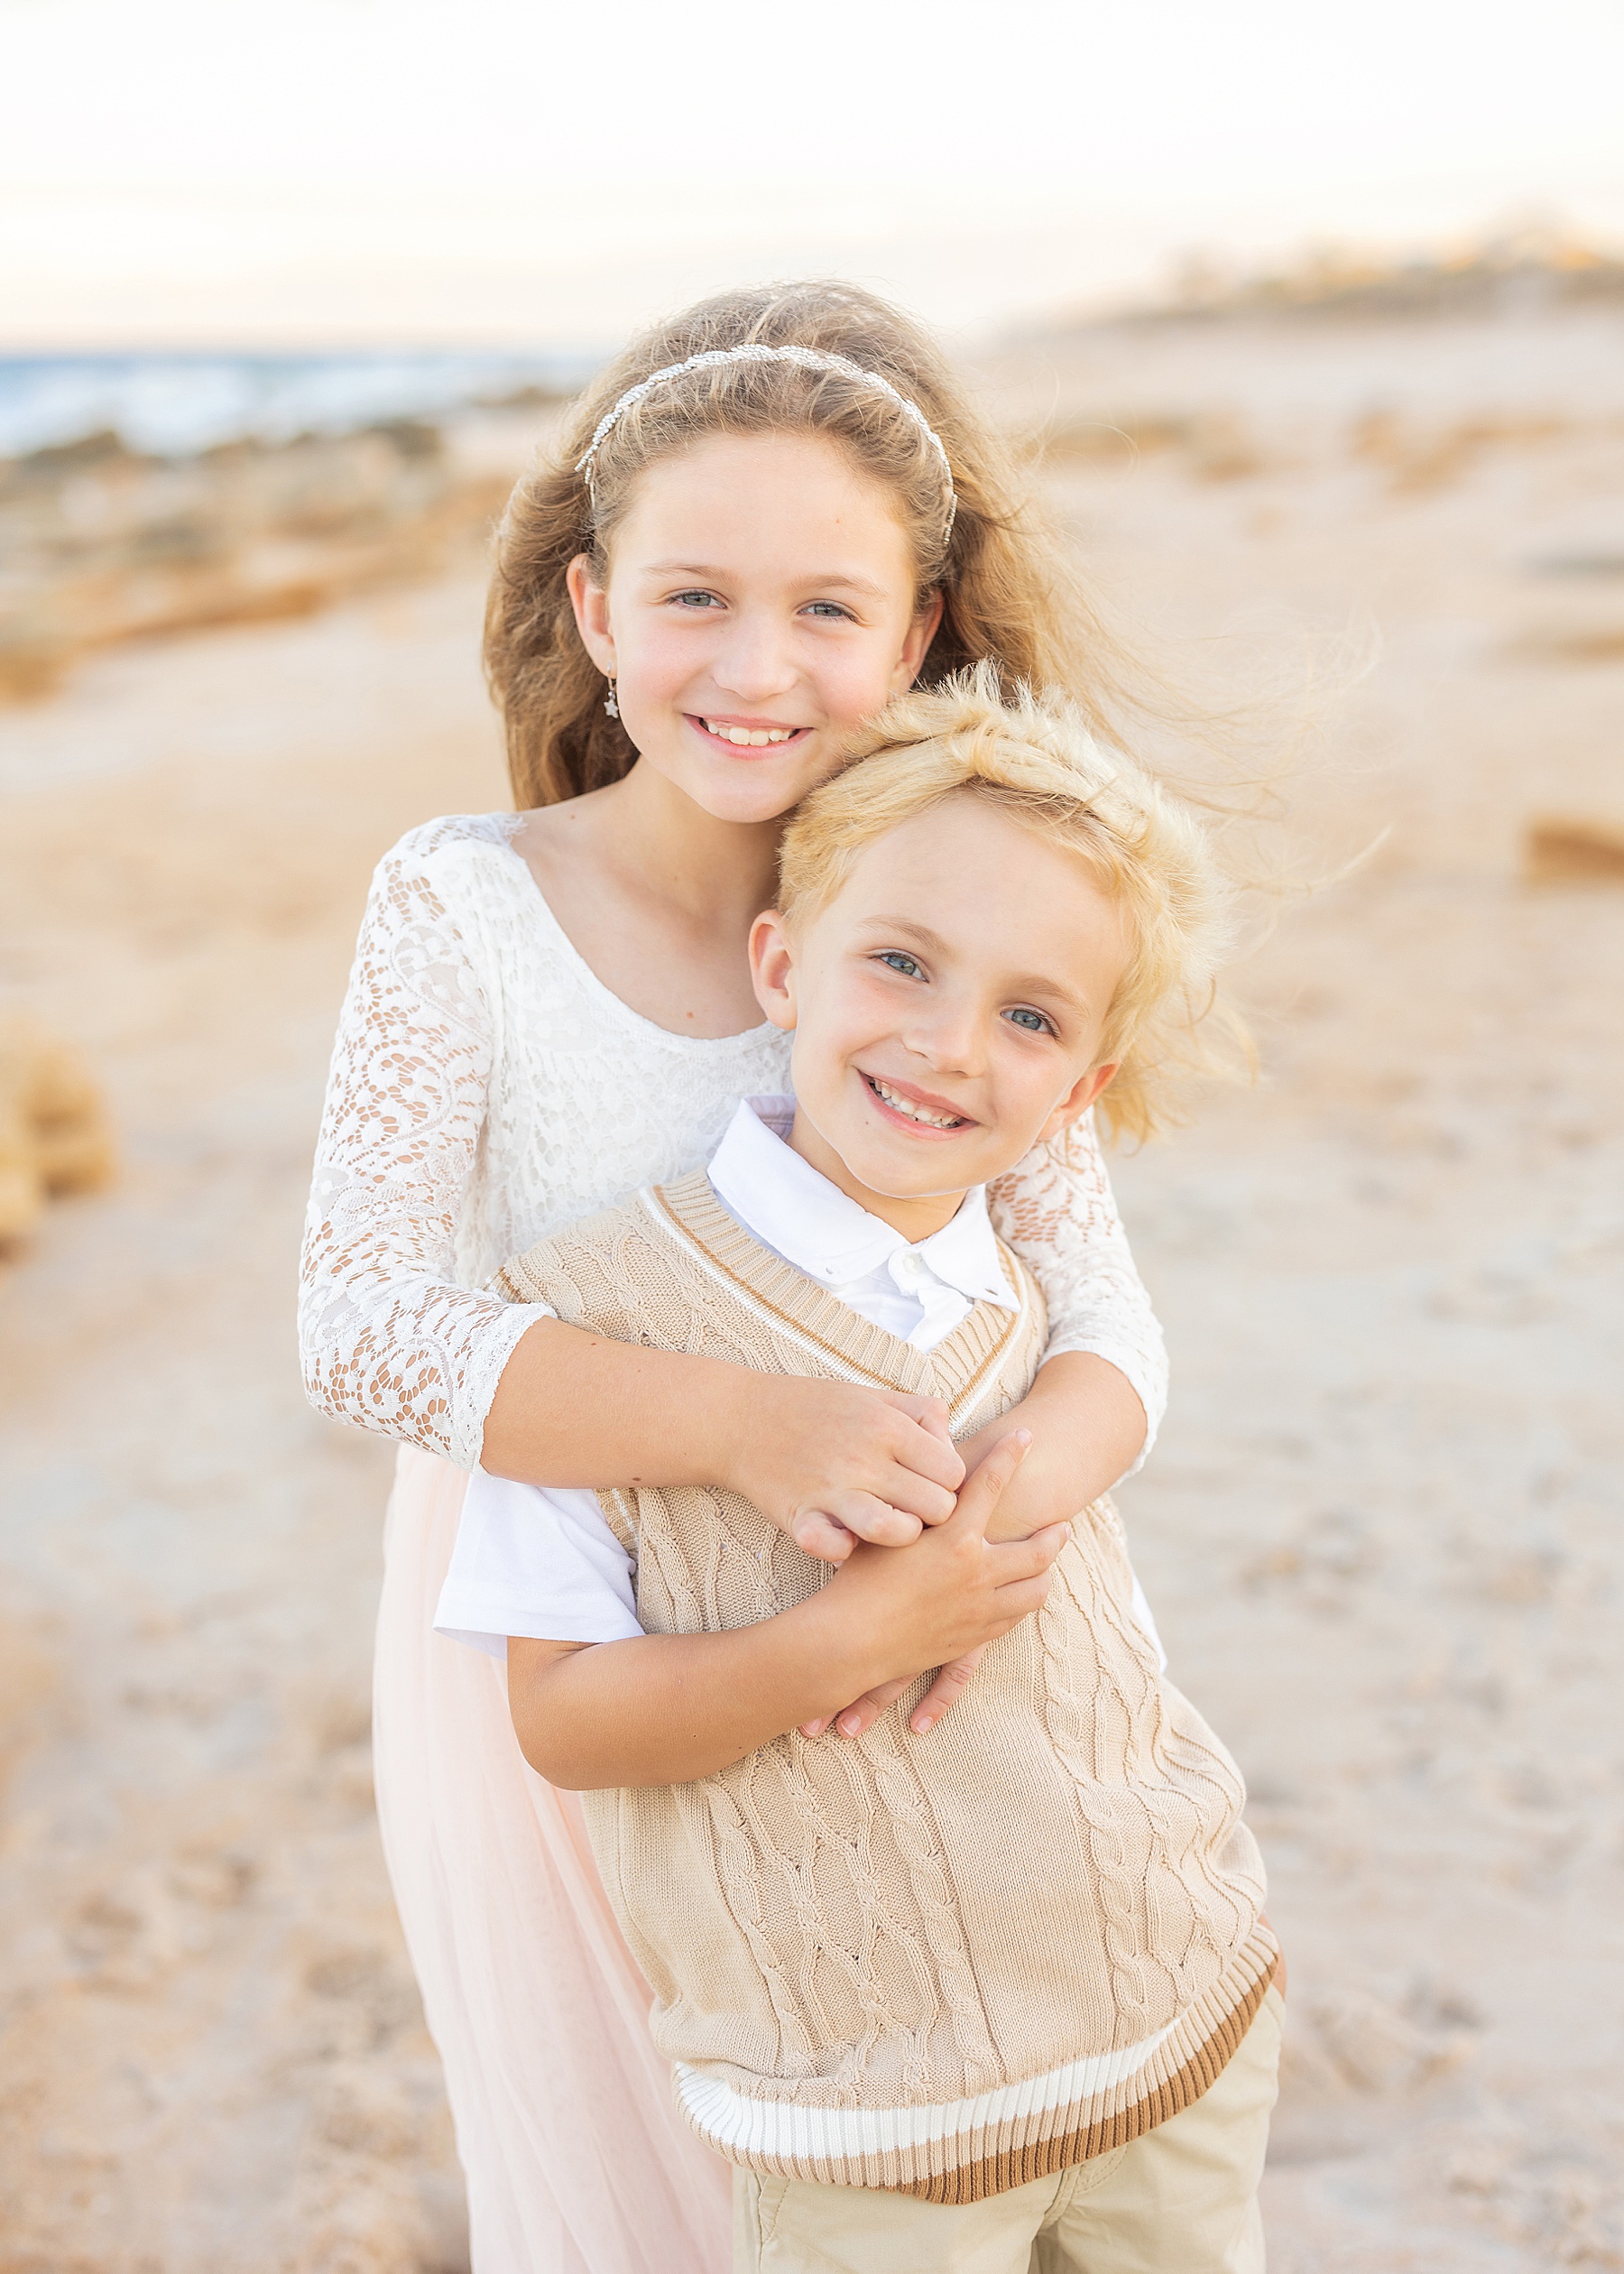 little blond haired boy standing with sibling wearing neutral colors on the beach at sunset